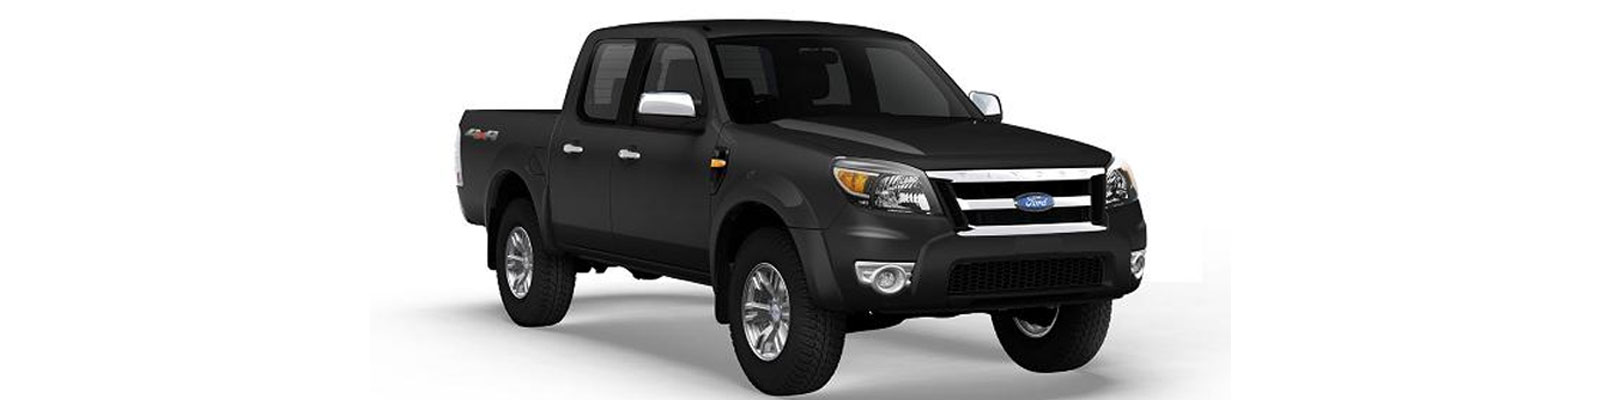 Accessories For The Ford Ranger Double Cab 2009-2012